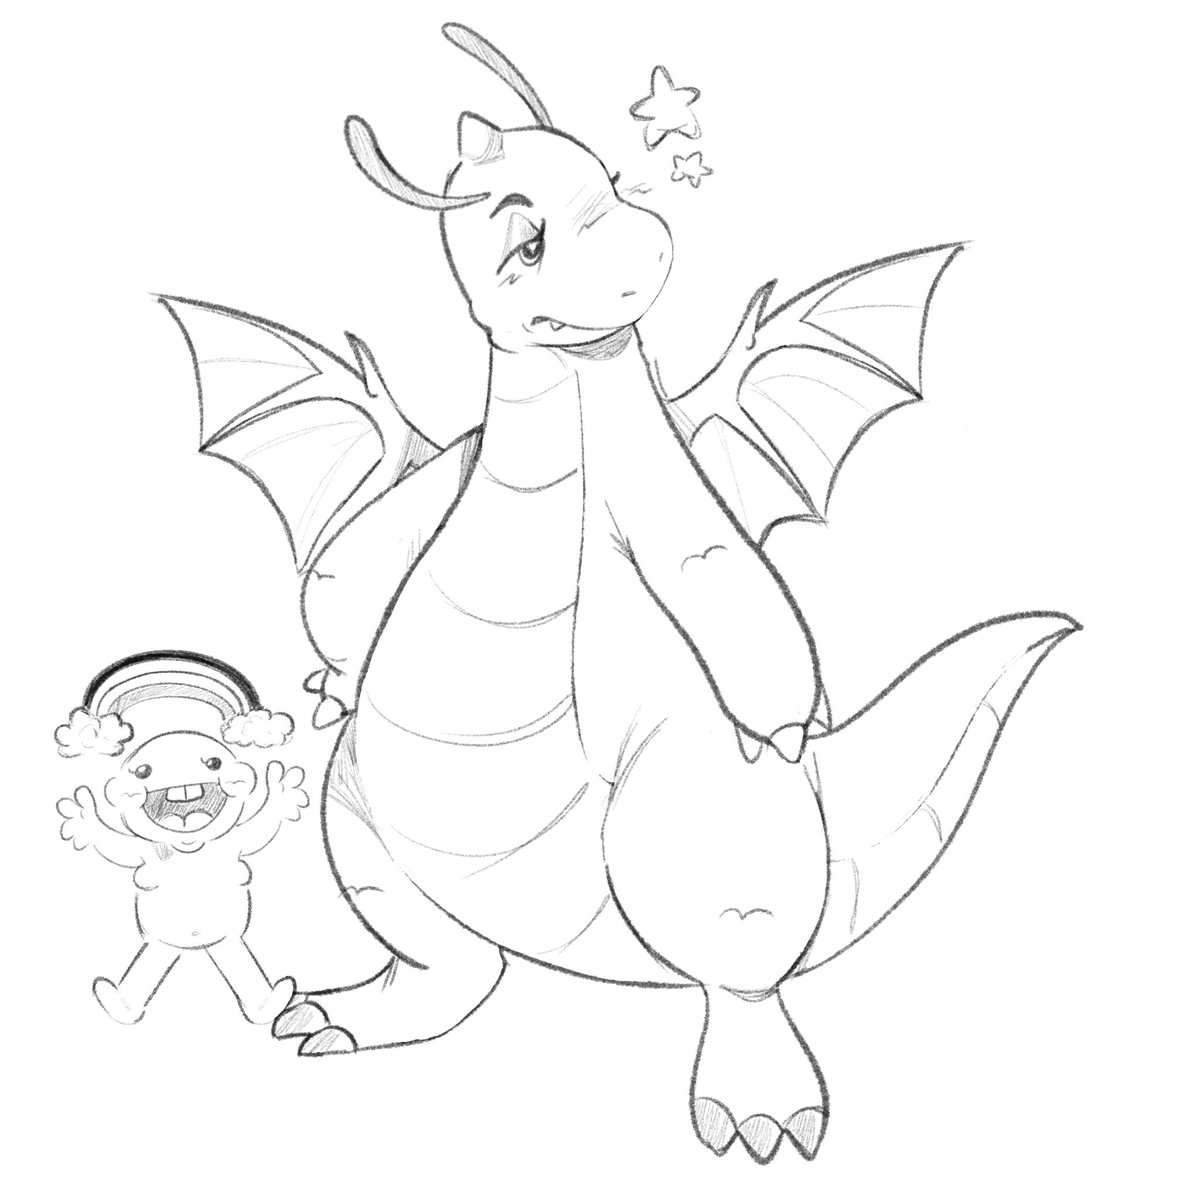 i think dragonite is very cool